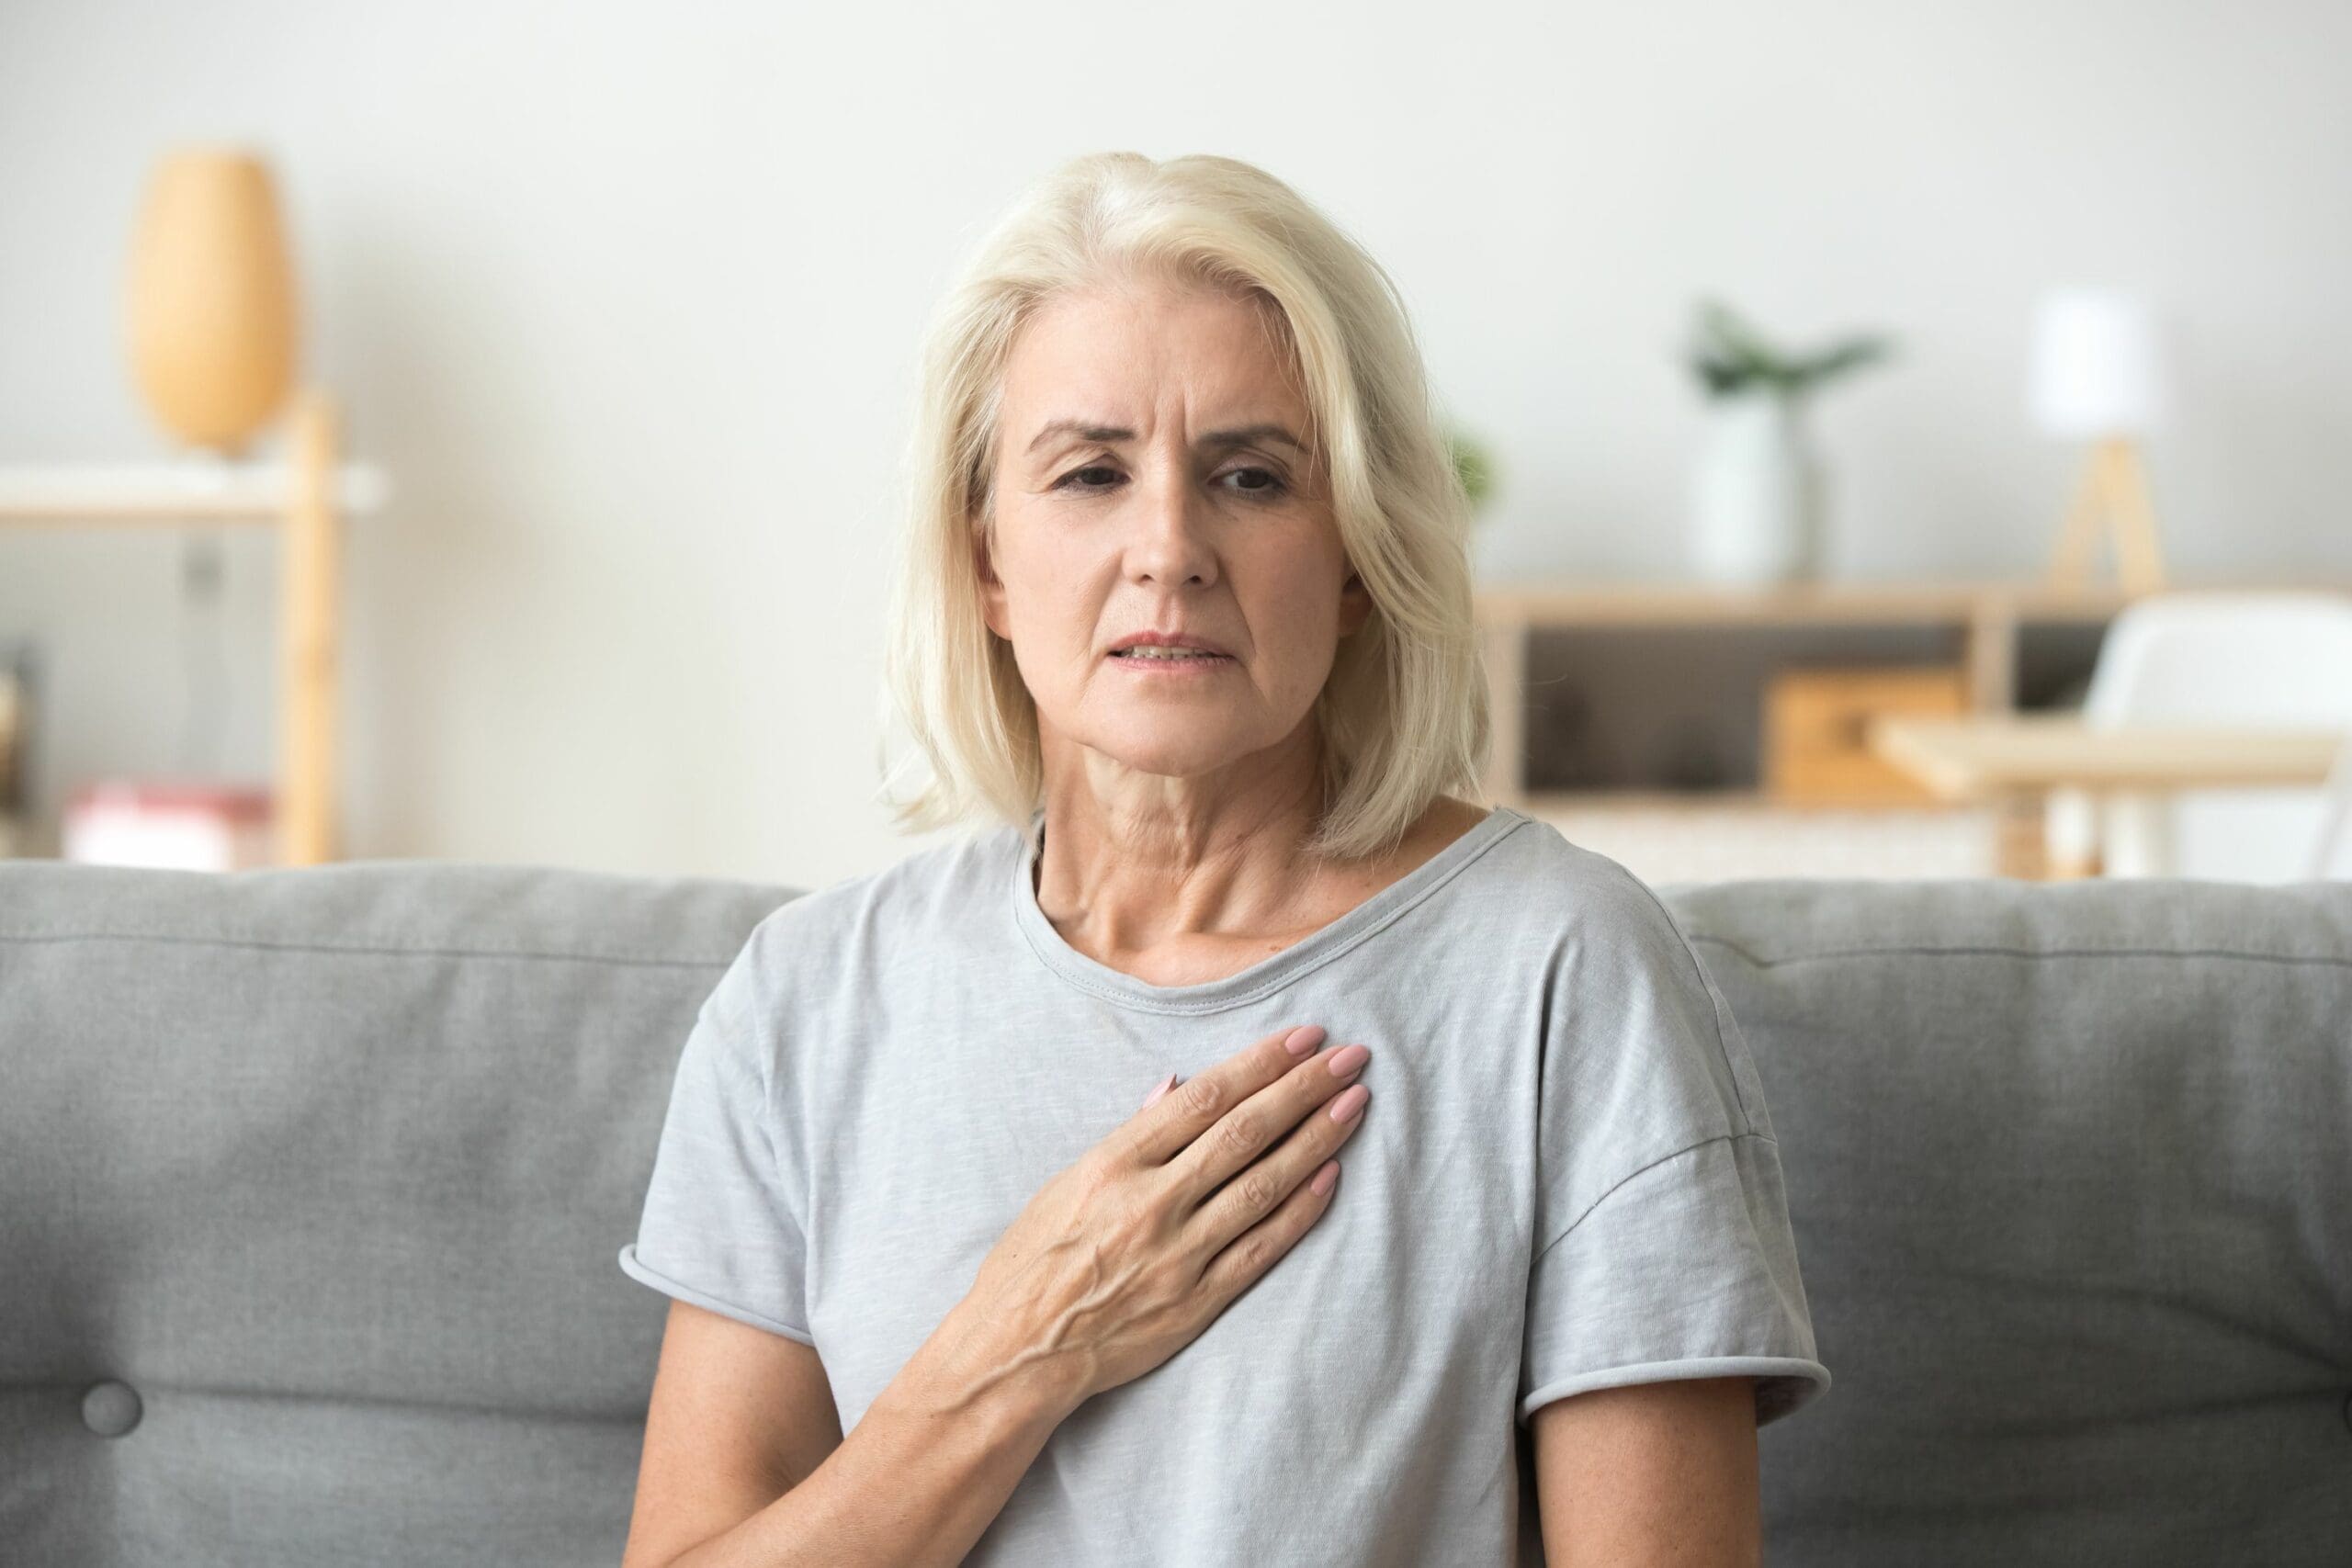 What are the signs of heart attack in women?